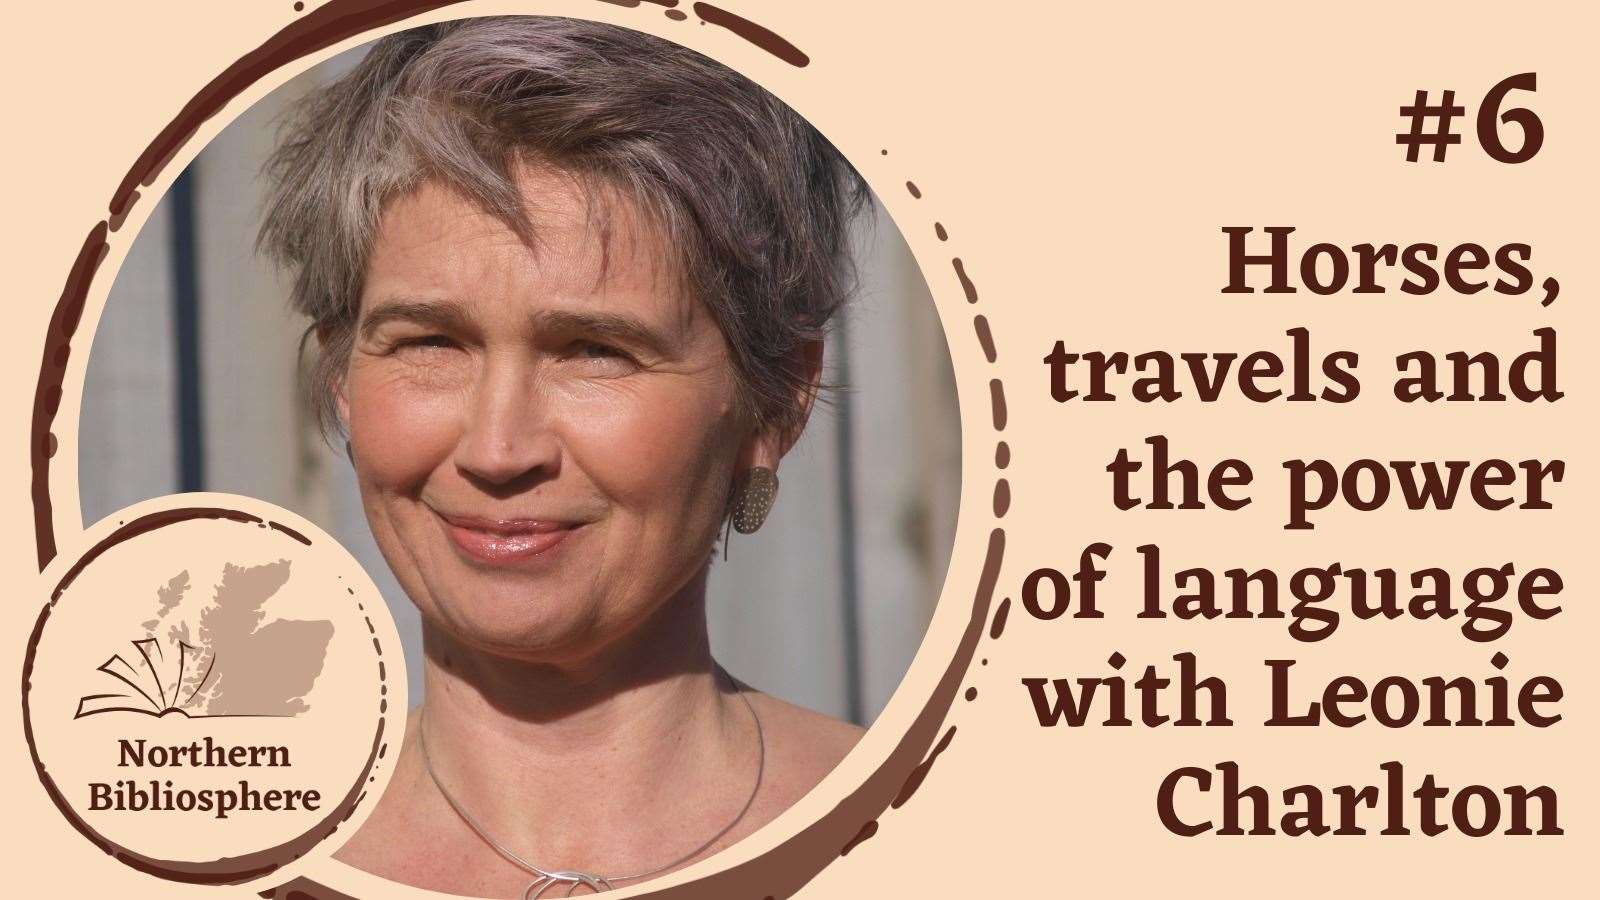 Leonie Charlton, author of Marram, is the guest of our sixth episode.